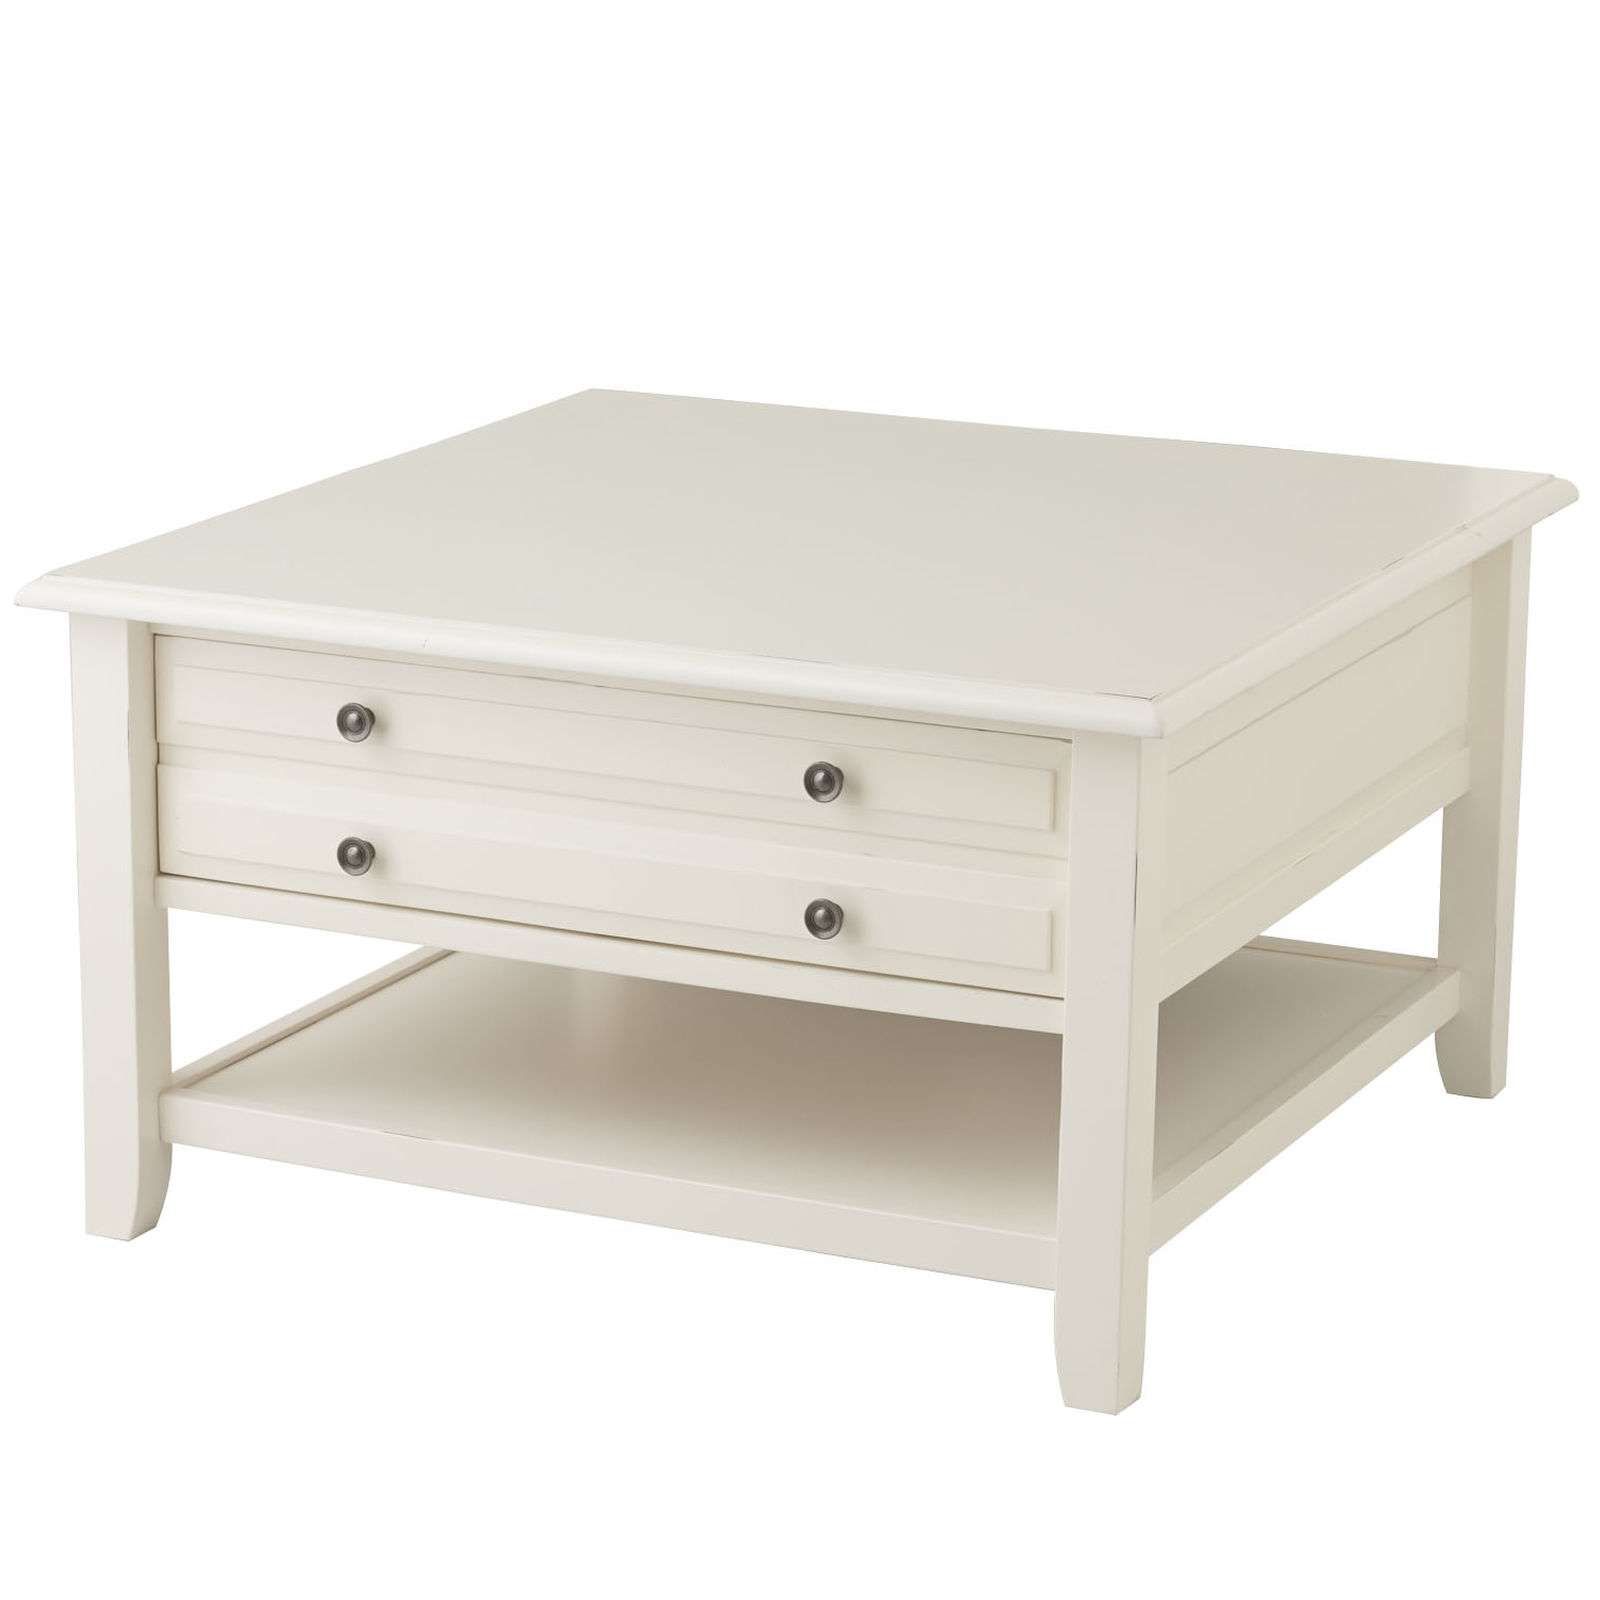 Coffee Tables : White Coffee Table With Storage White And Glass In Famous White Coffee Tables With Storage (View 7 of 20)